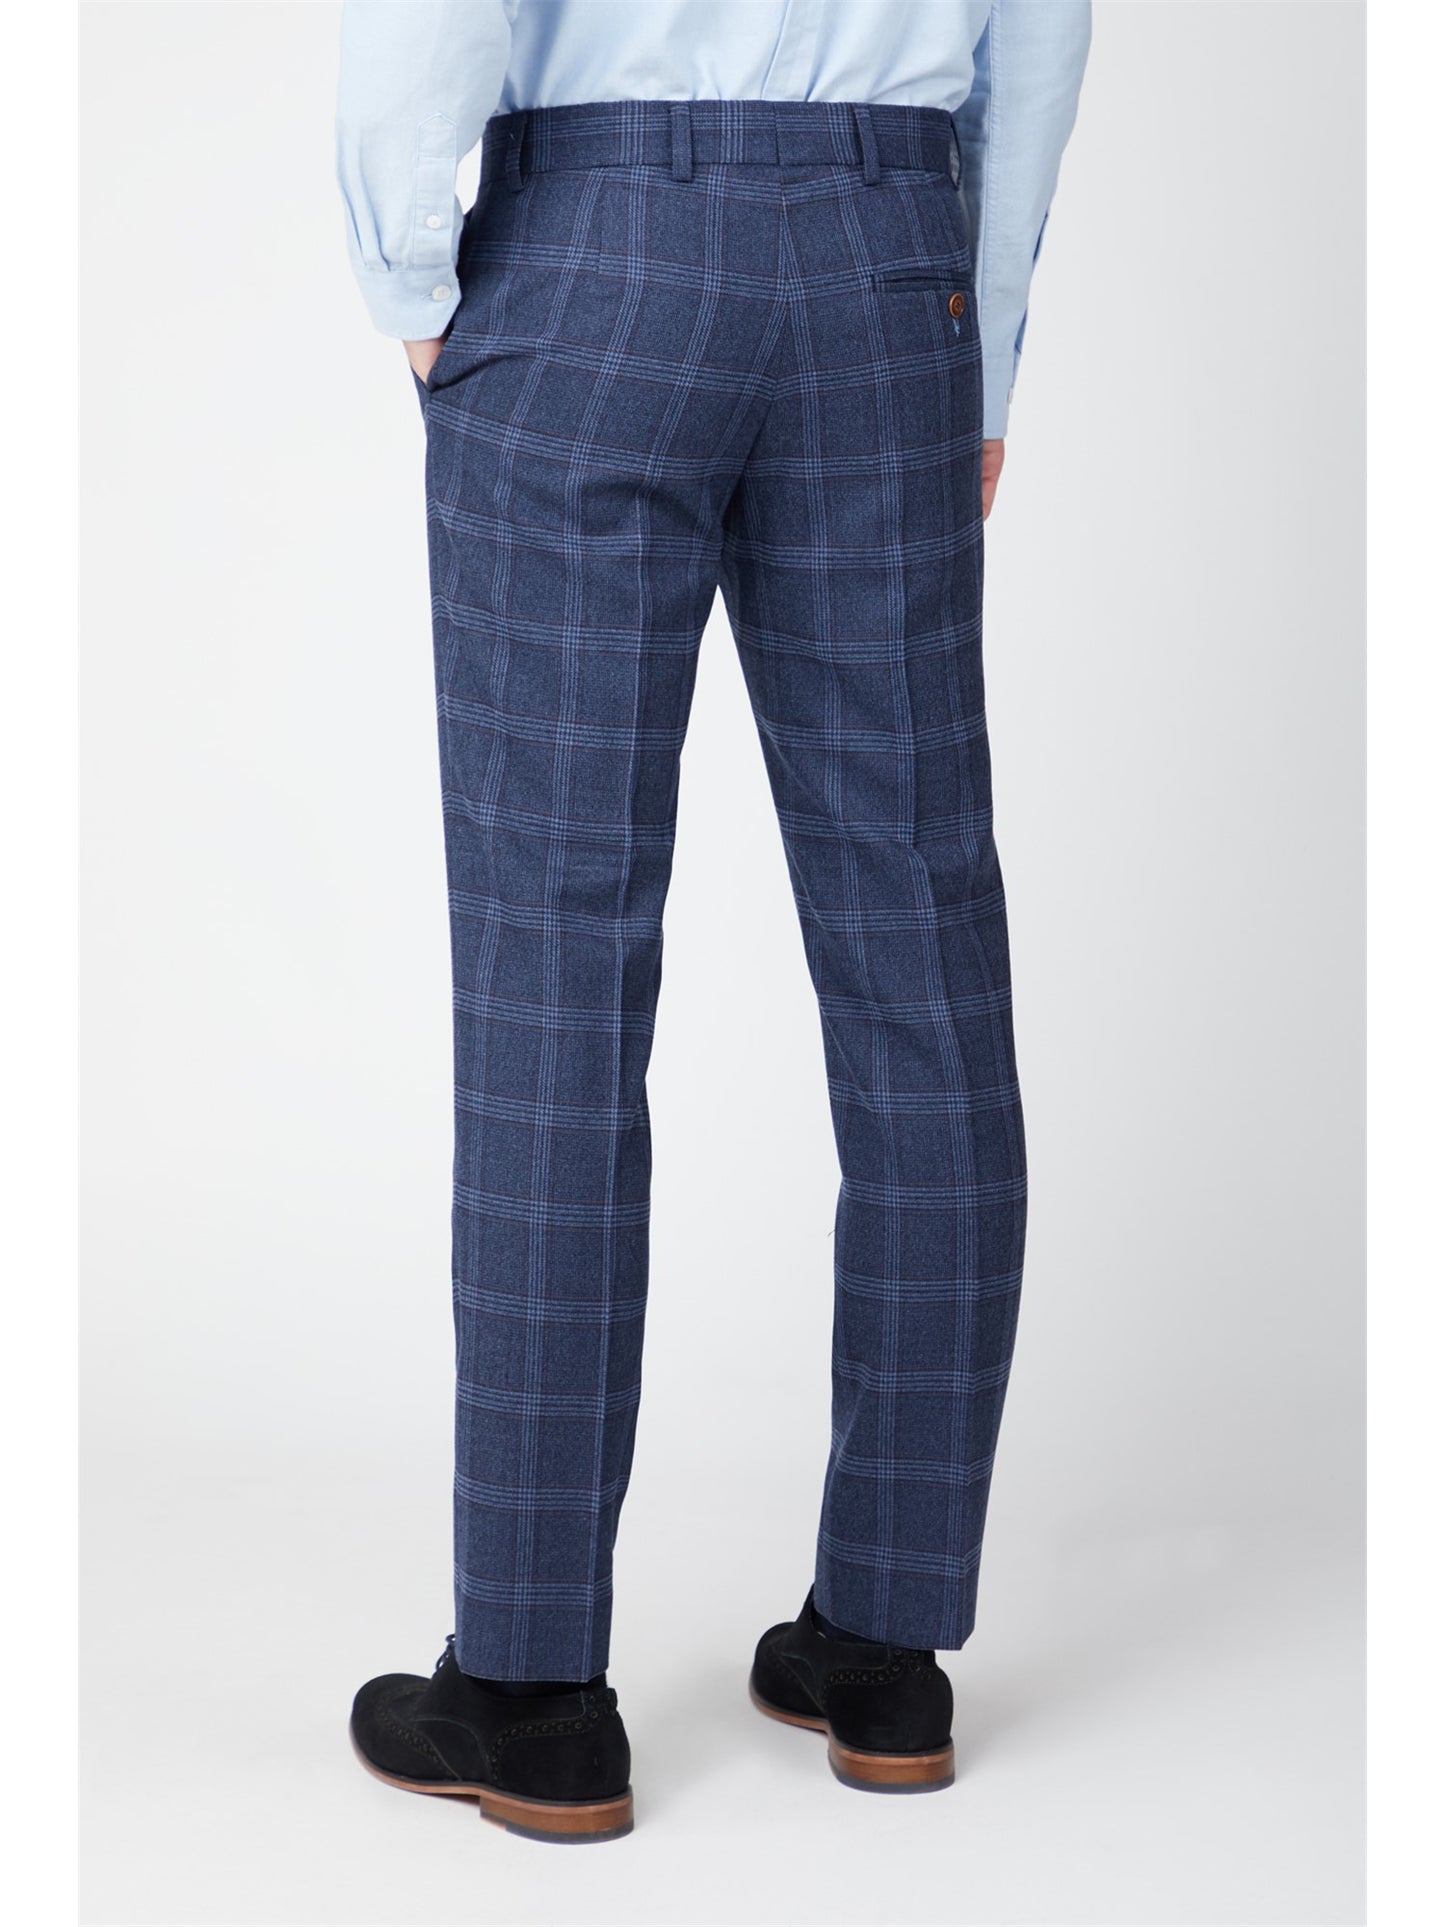 Navy Blue Over Check from Antique Rogue - Trousers